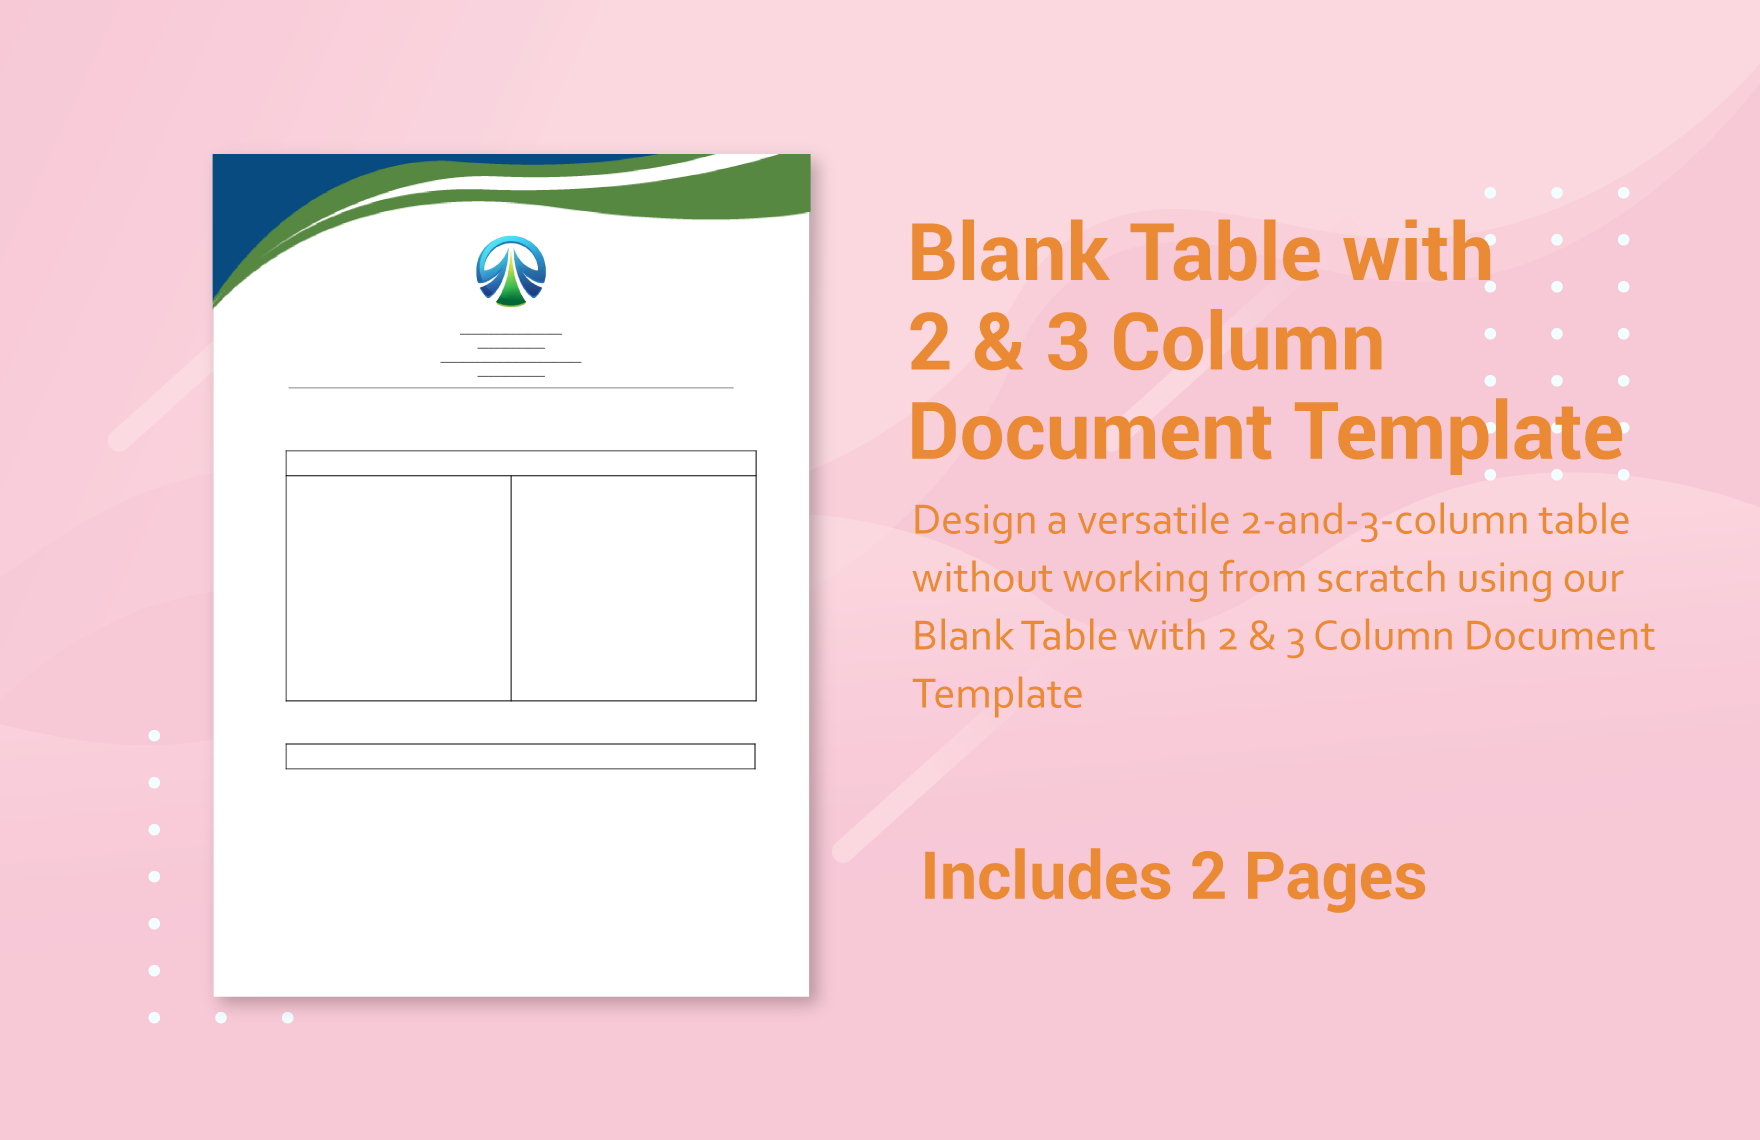 Blank Table with 2 & 3 Column Document Template